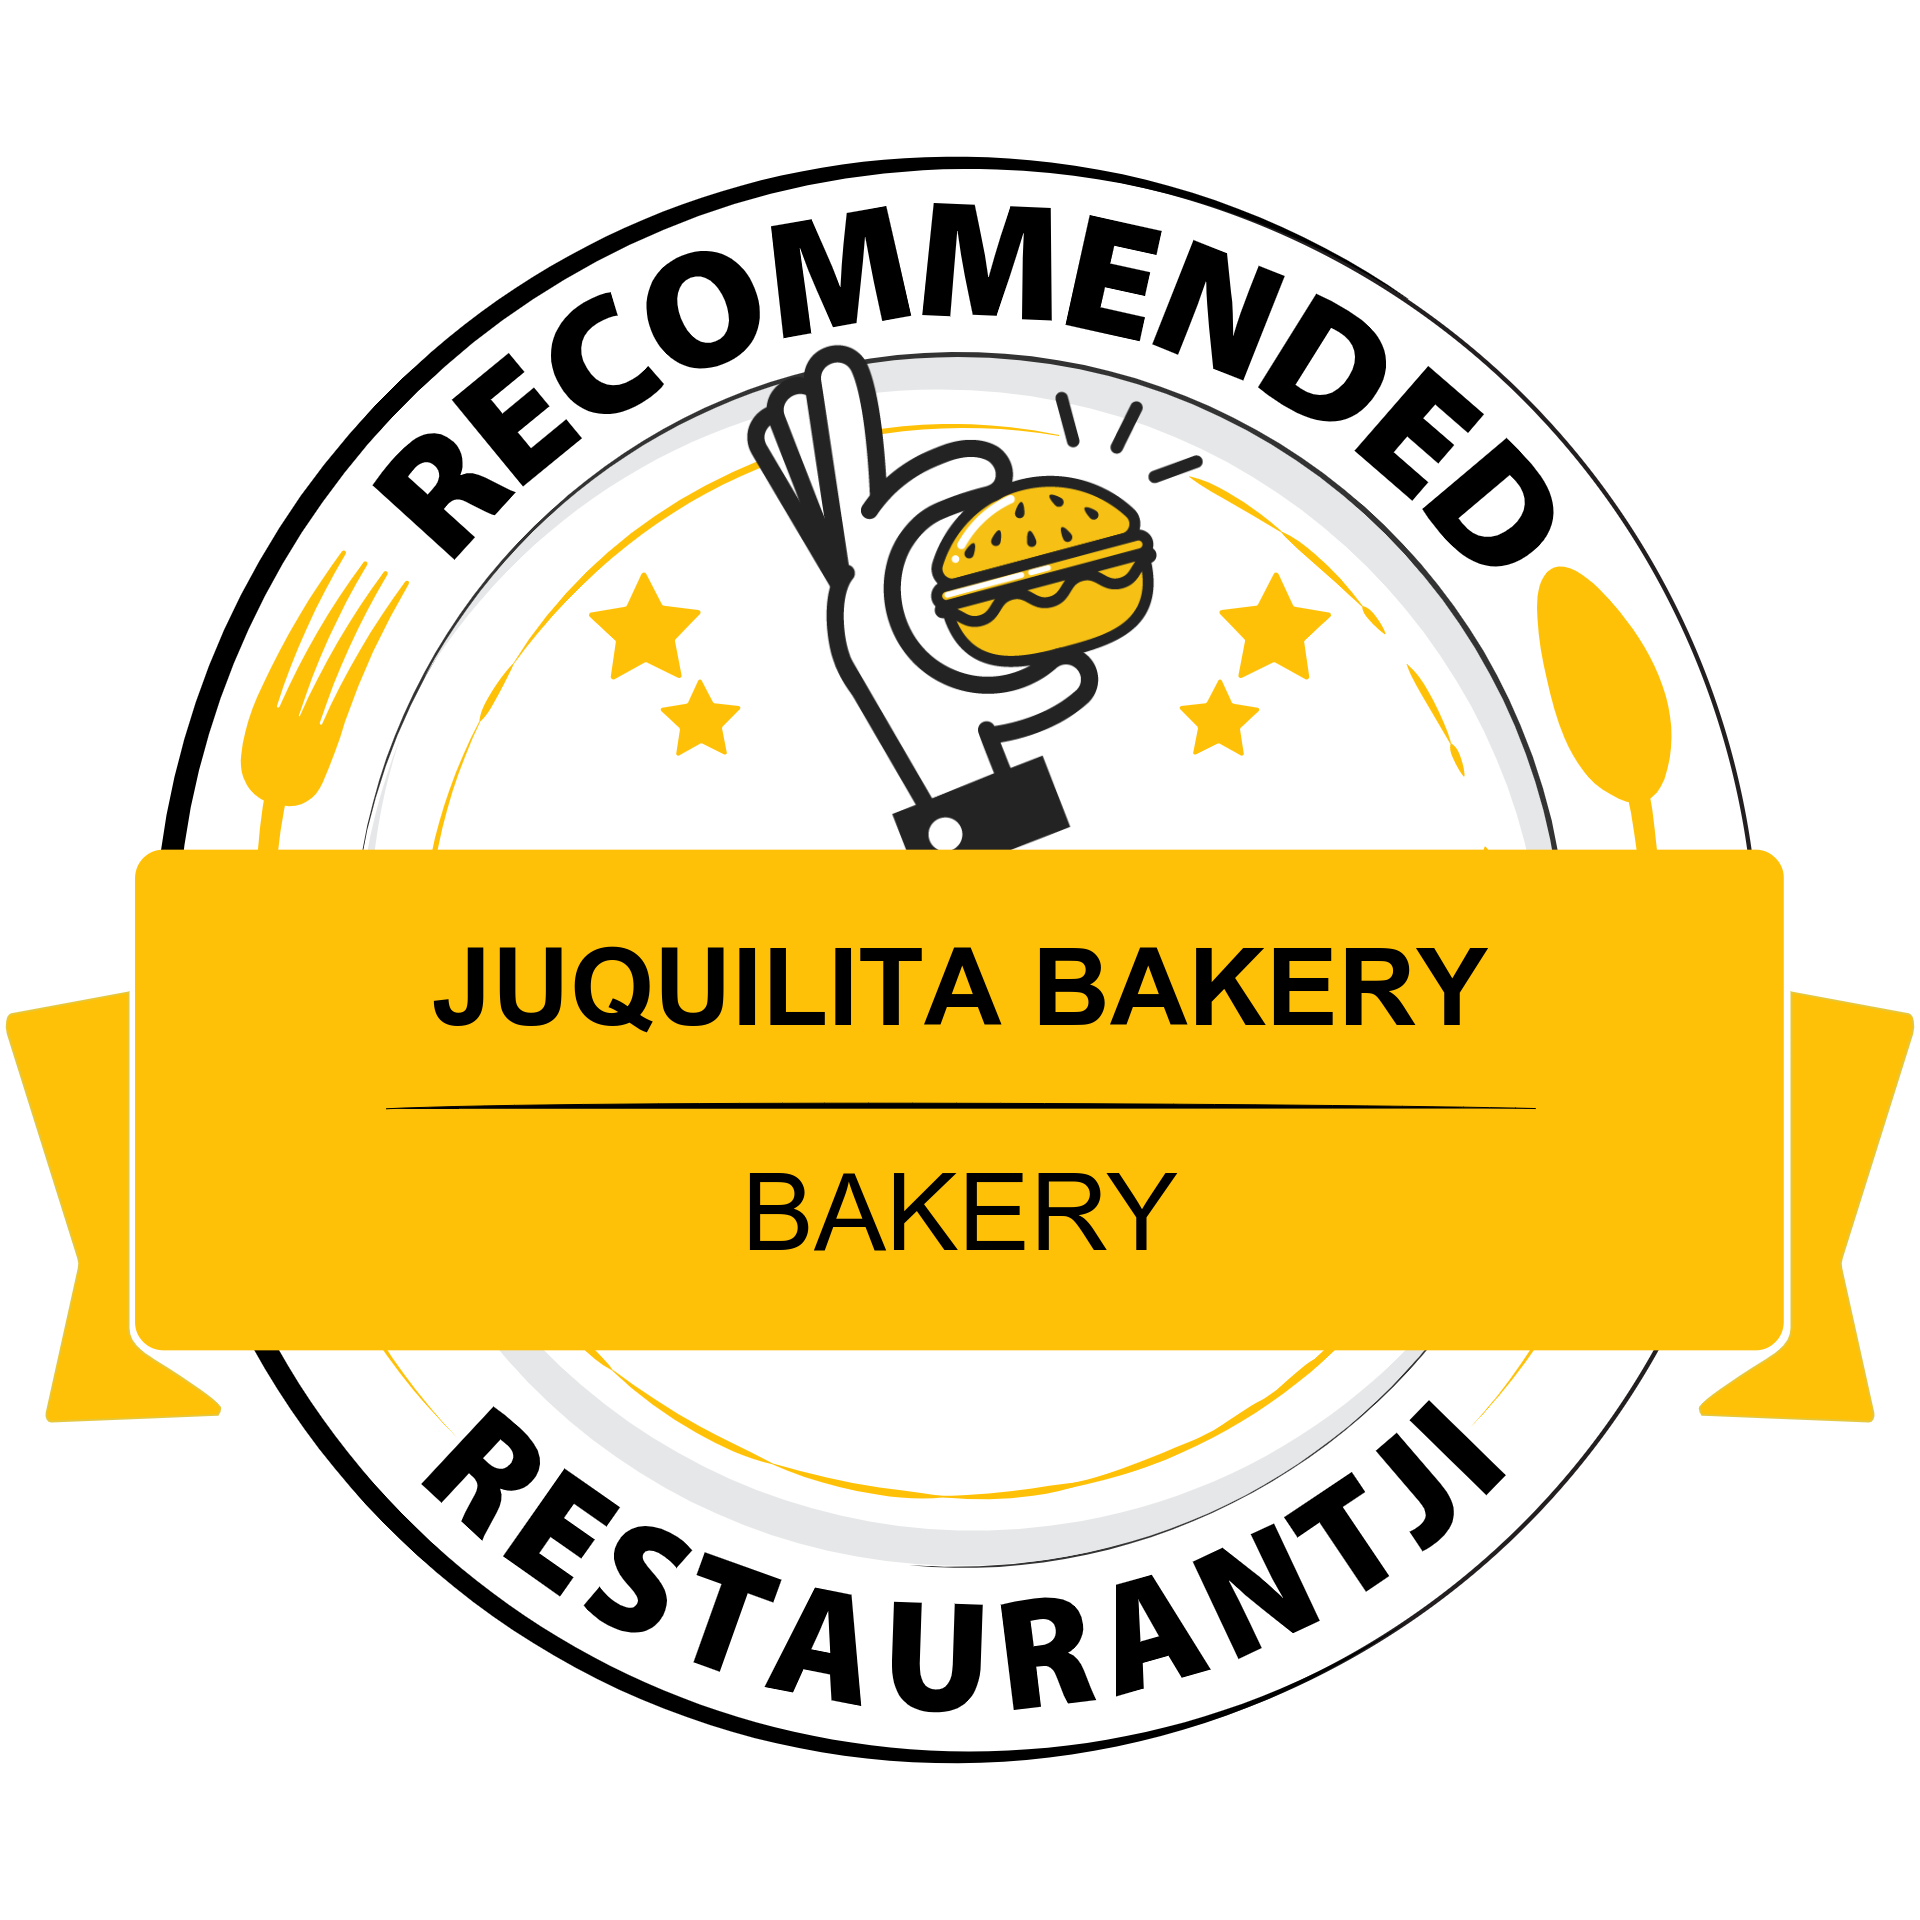 Juquilita Bakery is a standout choice on Restaurantji - a convenient, all-in-one local dining guide with reviews, menus and photos.